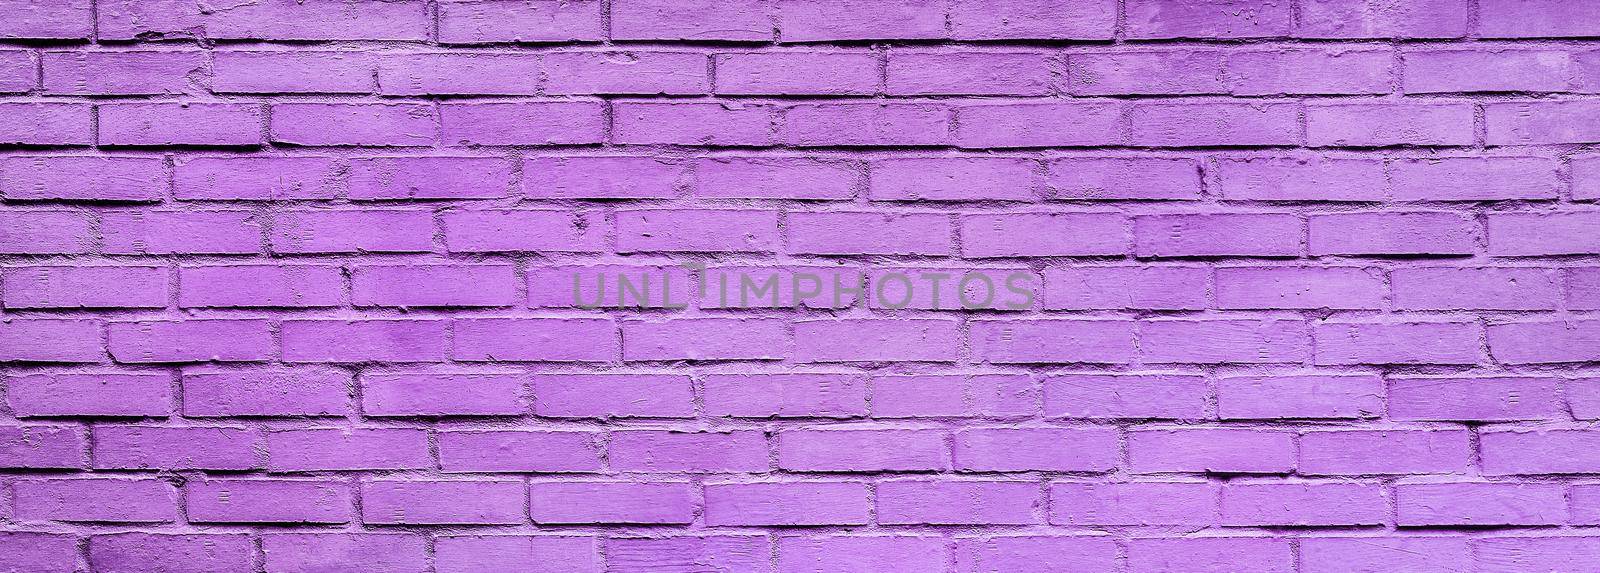 Light violet Brick wall texture close up. Top view. Modern brick wall wallpaper design for web or graphic art projects. Abstract background for business cards and covers. Template or mock up.